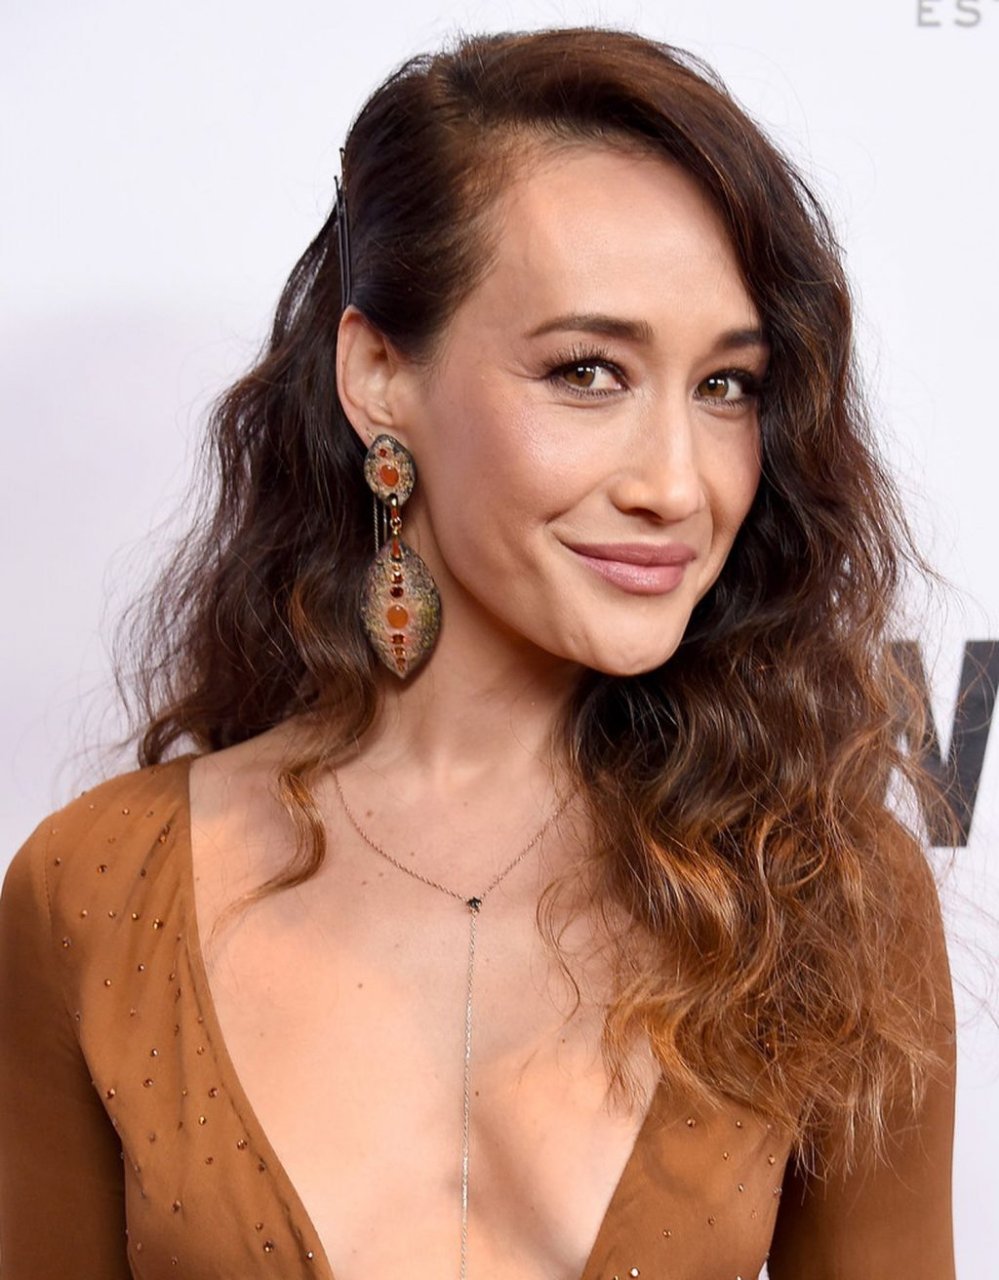 Dress Photos of Maggie Q Appearance on The Red Carpet With Massive Cleavage celebmasta.com 7